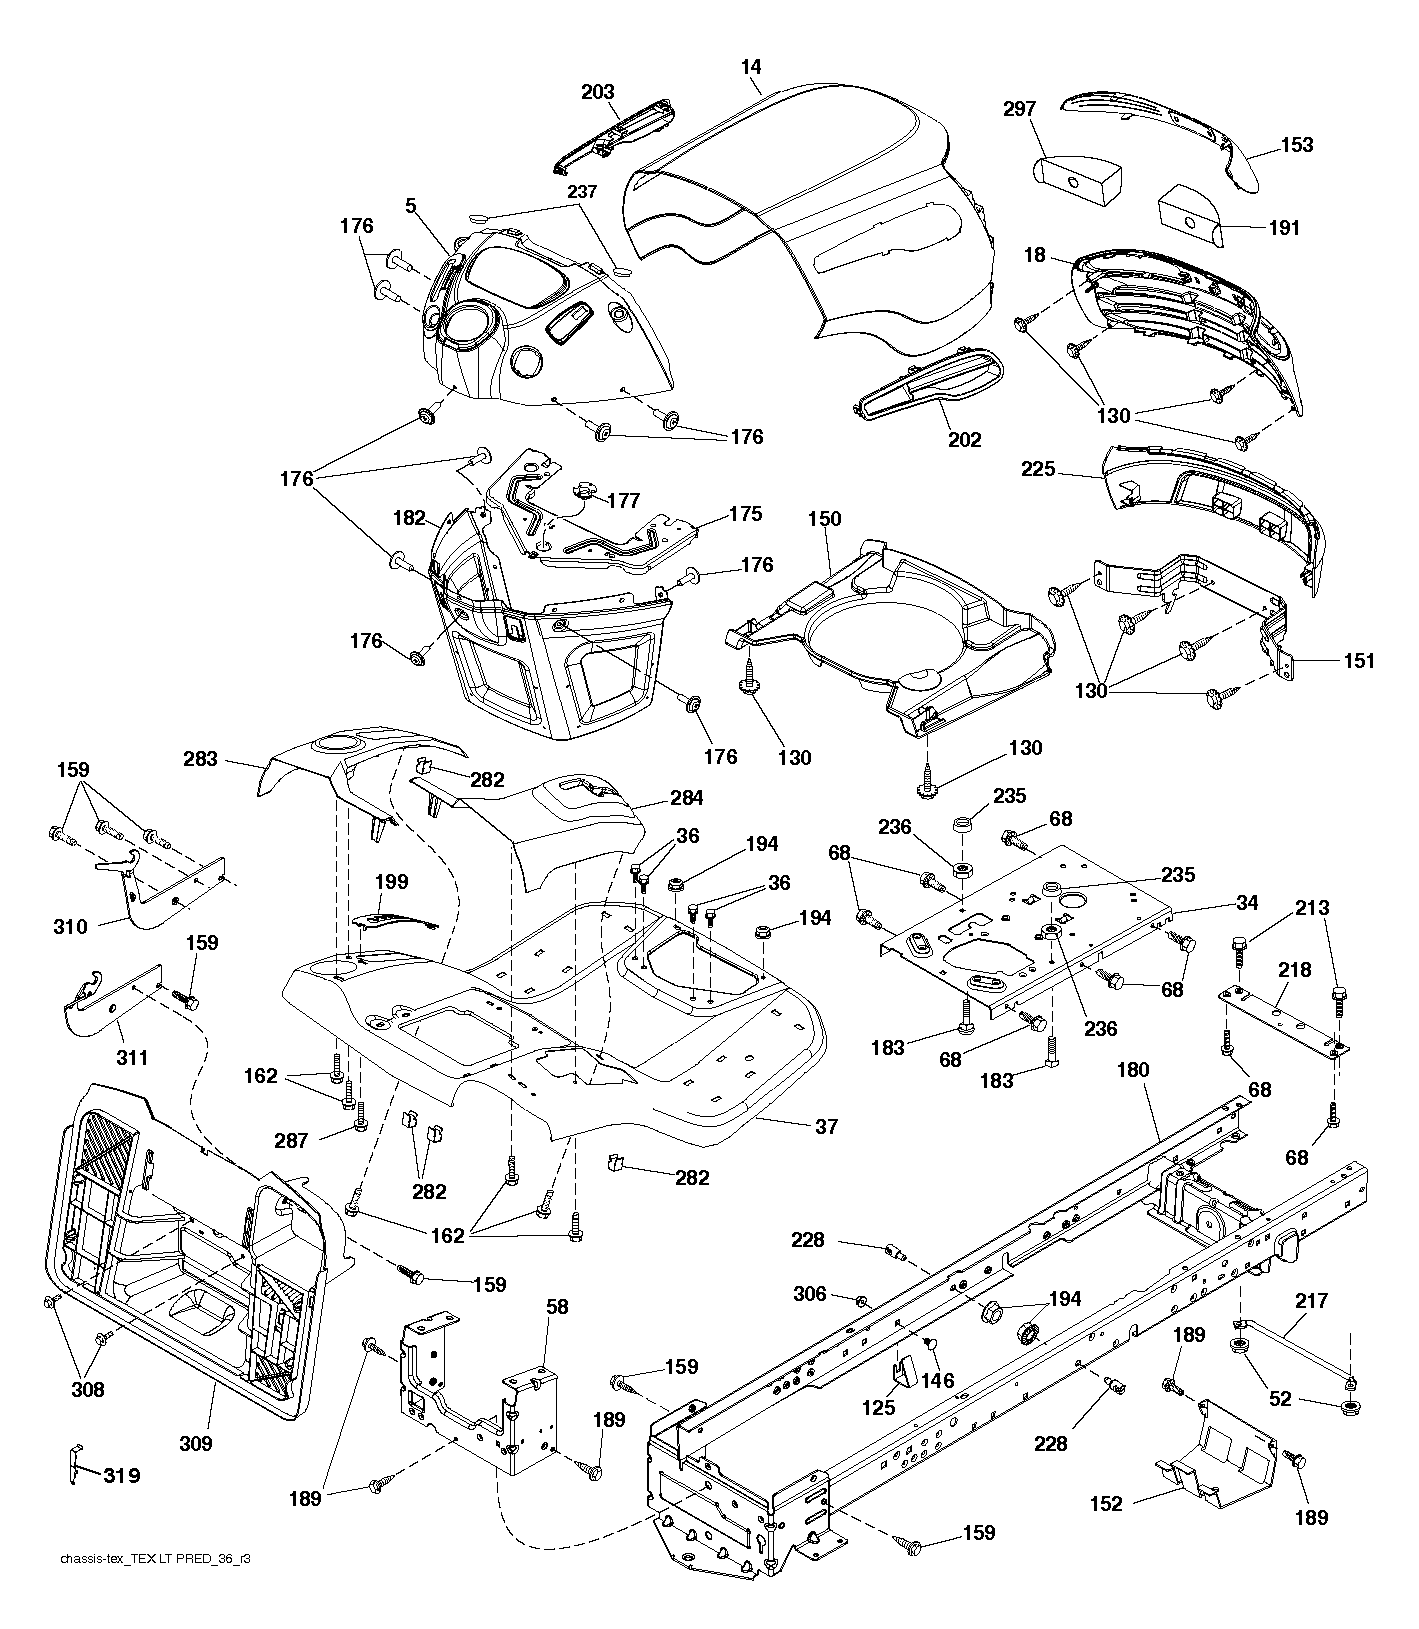 Chassis and appendix 532425772, 532441287, 532426511, 532196125, 596030701, 532441339, 596040501, 532412280, 596030701, 581684801, 596321701, 581857901, 532400267, 532187568, 531169901, 532444264, 817000612, 532142432, 532199472, 532400776, 532195228, 597630801, 532407176, 874520520, 532428867, 532416502, 873900500, 583371401, 532424322, 532424323, 596030501, 532409167, 532196395, 532441487, 593824001, 532406129, 873930500, 532403704, 532414110, 532440361, 532440528, 817600406, 532401827, 532409149, 532171877, 532430246, 532446636, 532446637, 532174662